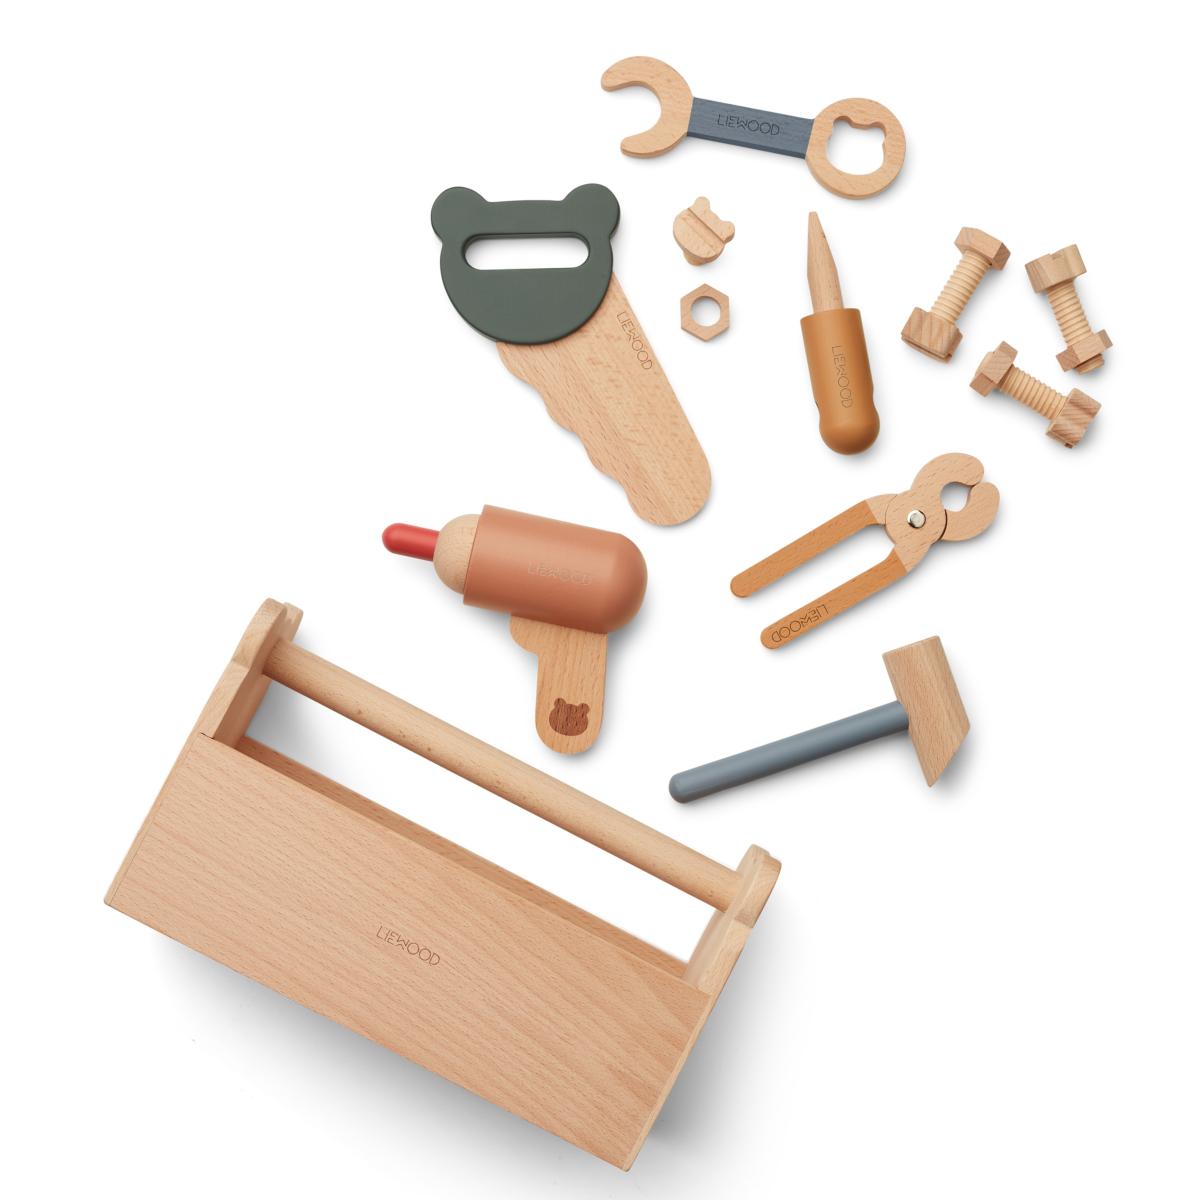 https://www.little-home.fr/Files/132653/Img/07/LW14403-9504-caisse-outils-bois-liewood-multi-zoom.jpg